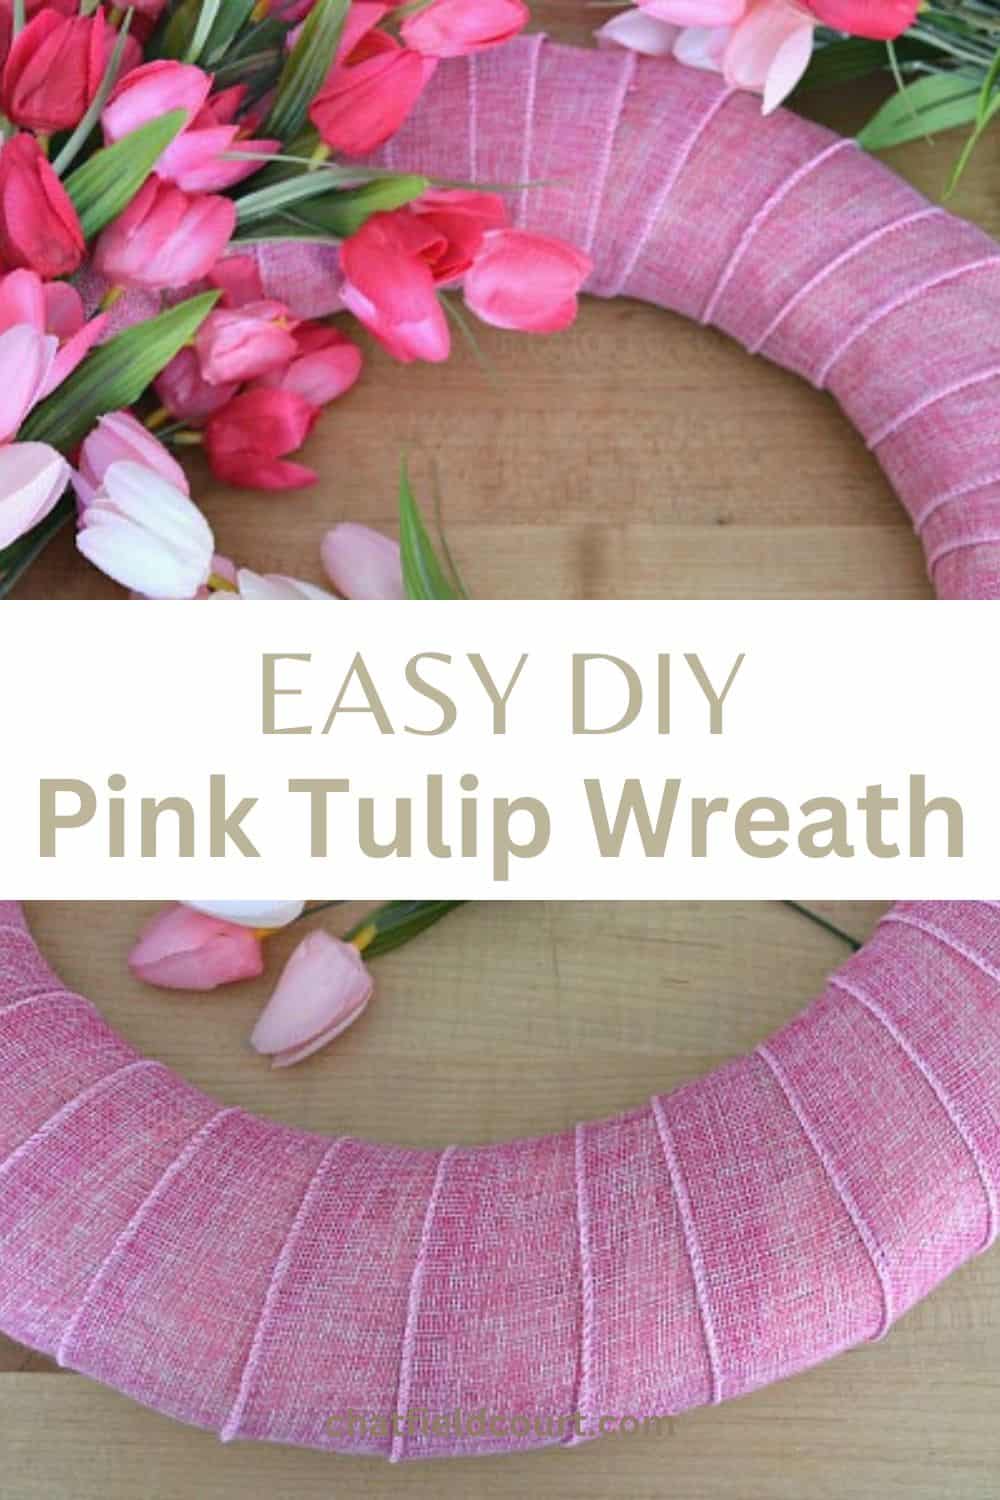 Creating a DIY pink tulip wreath with a wreath form and ribbon